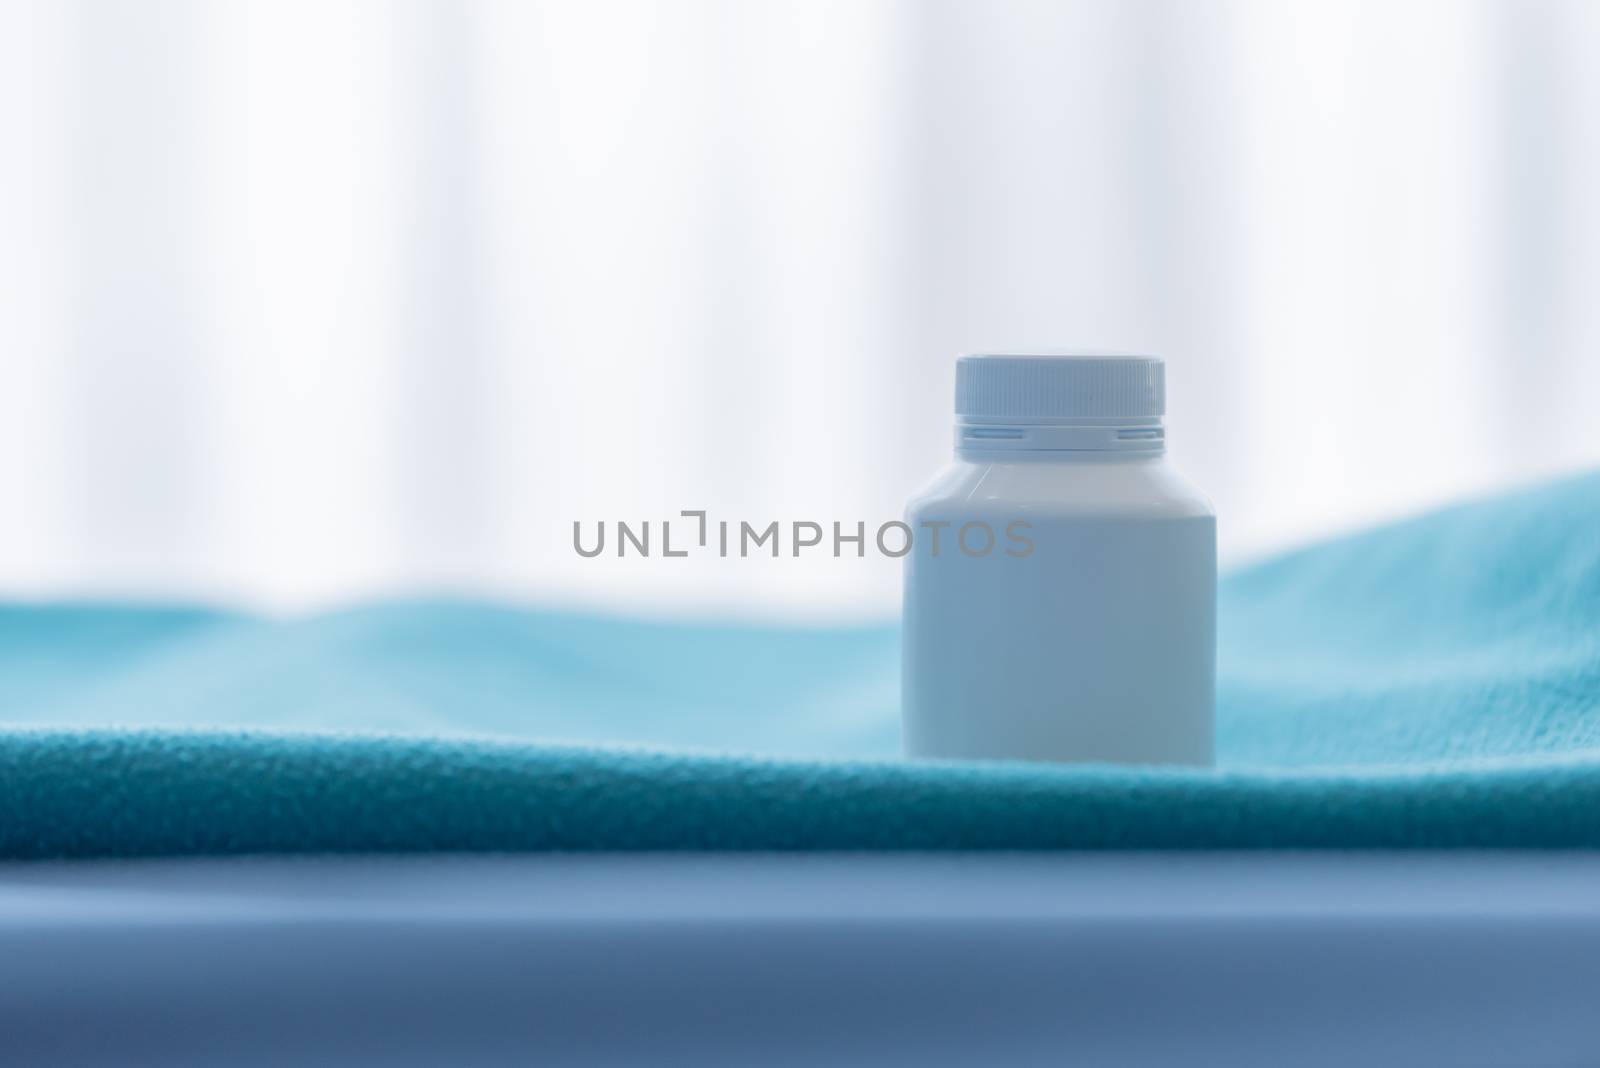 A white medicine bottle on the green bed sheet.